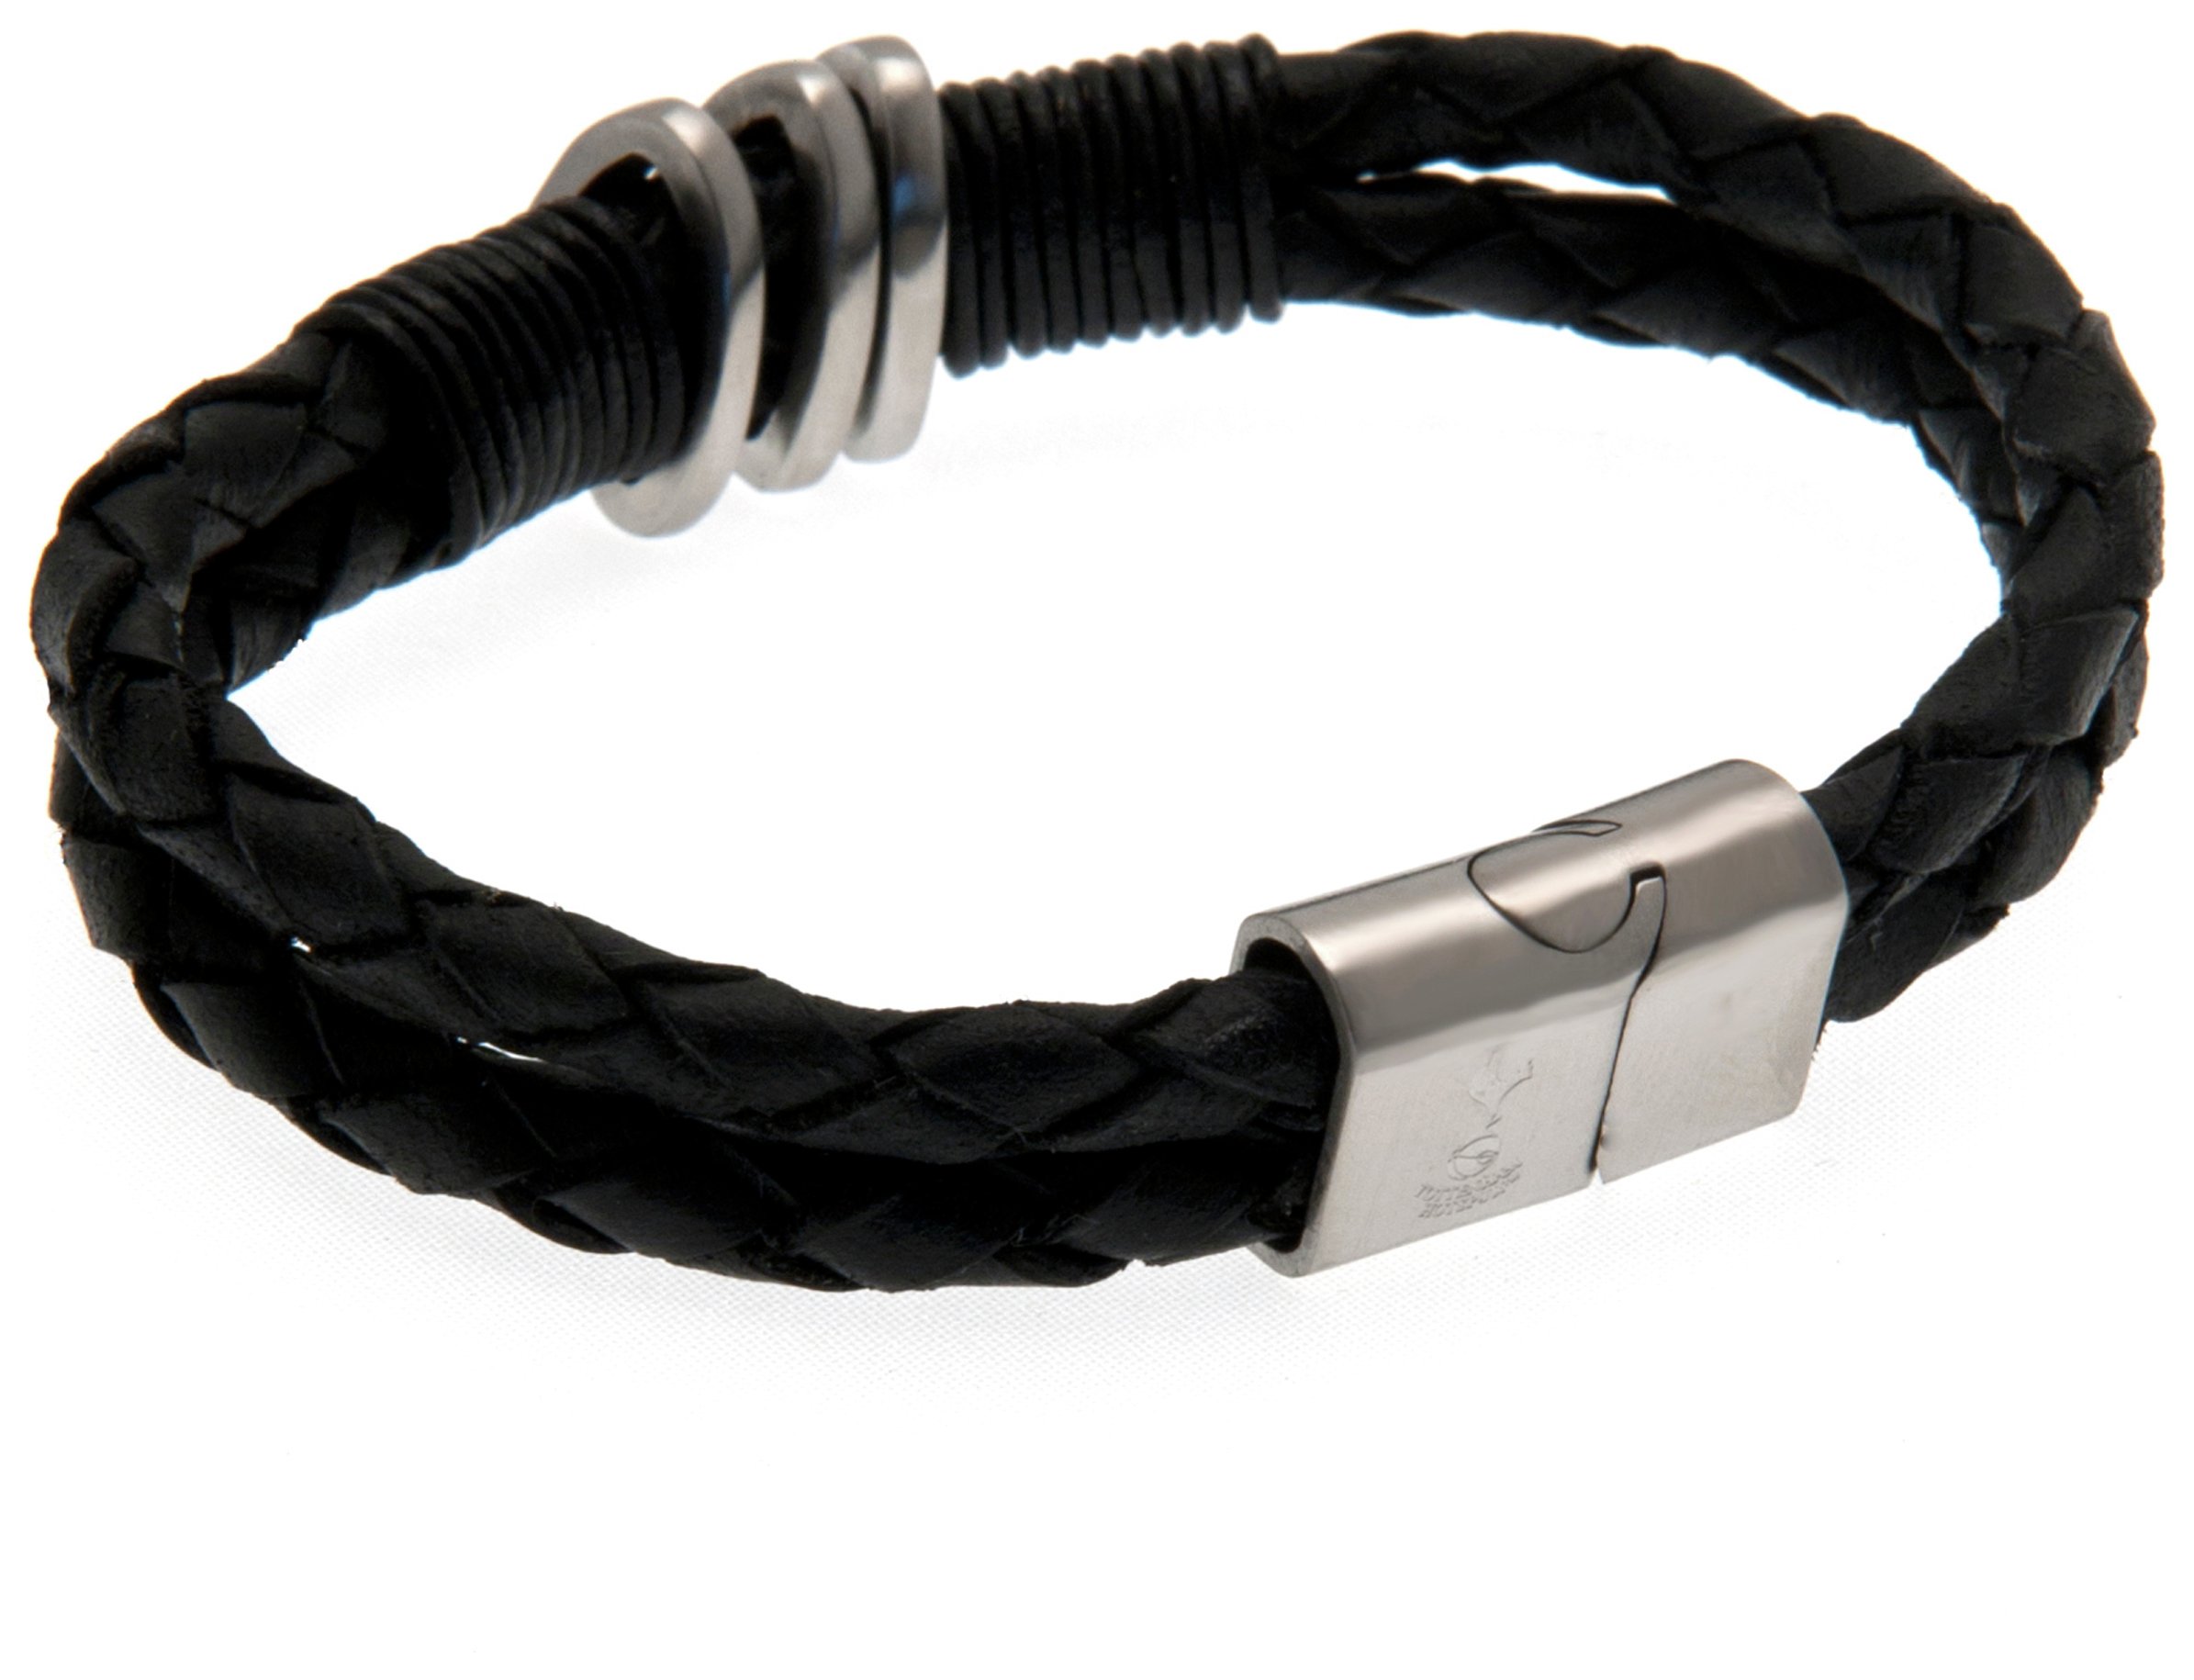 Stainless Steel and Leather Tottenham Hotspur Bracelet